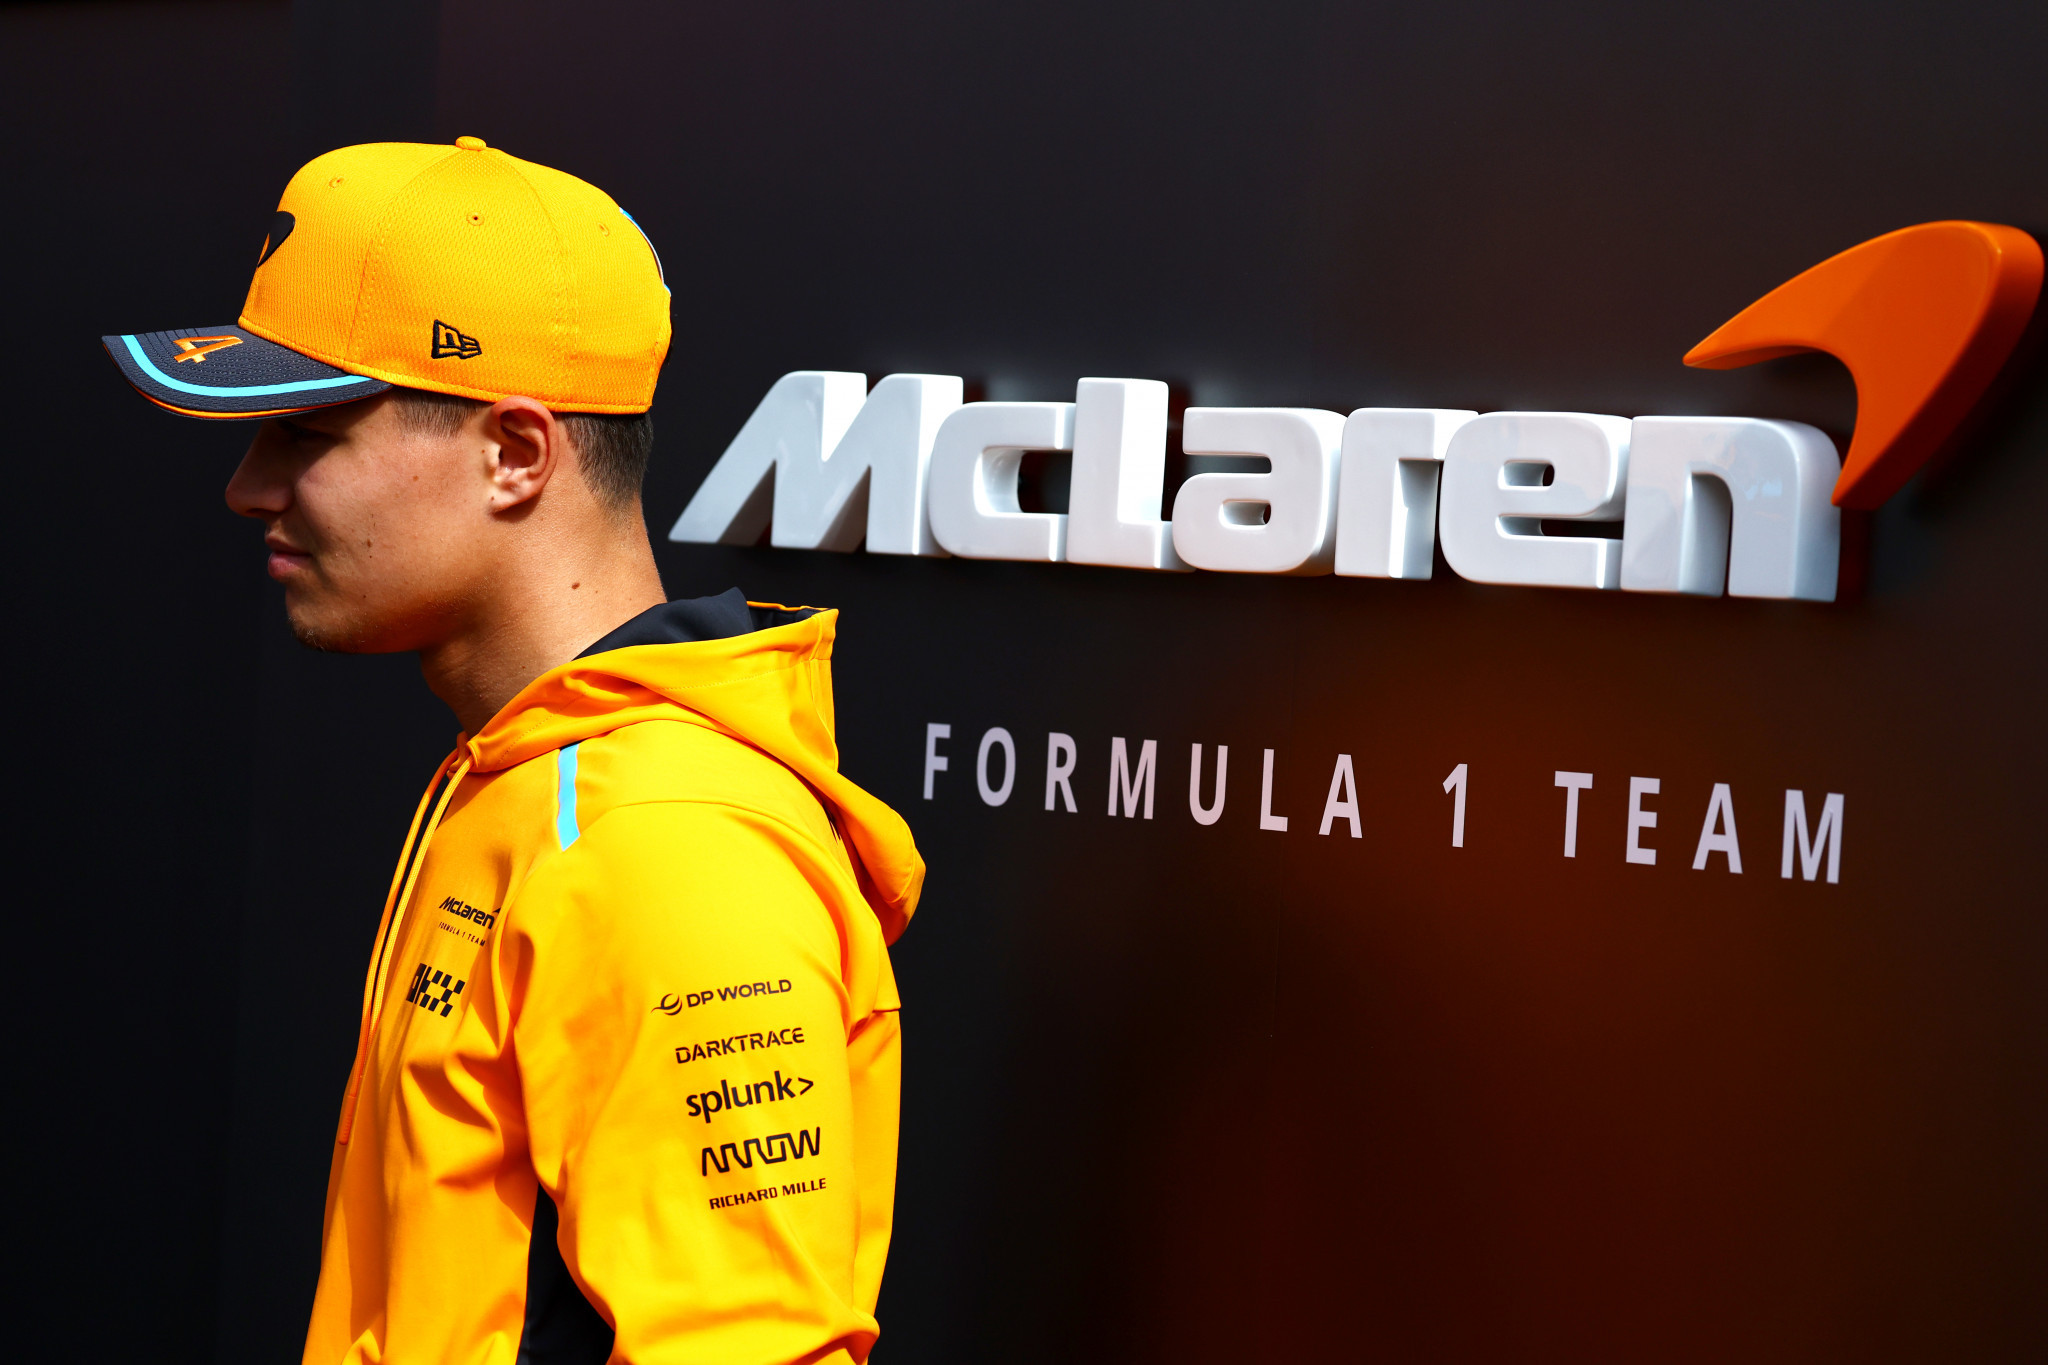 While Britain's Lando Norris feels the change will make the sprint more exciting, he stated that he does not want the short format race to be held 